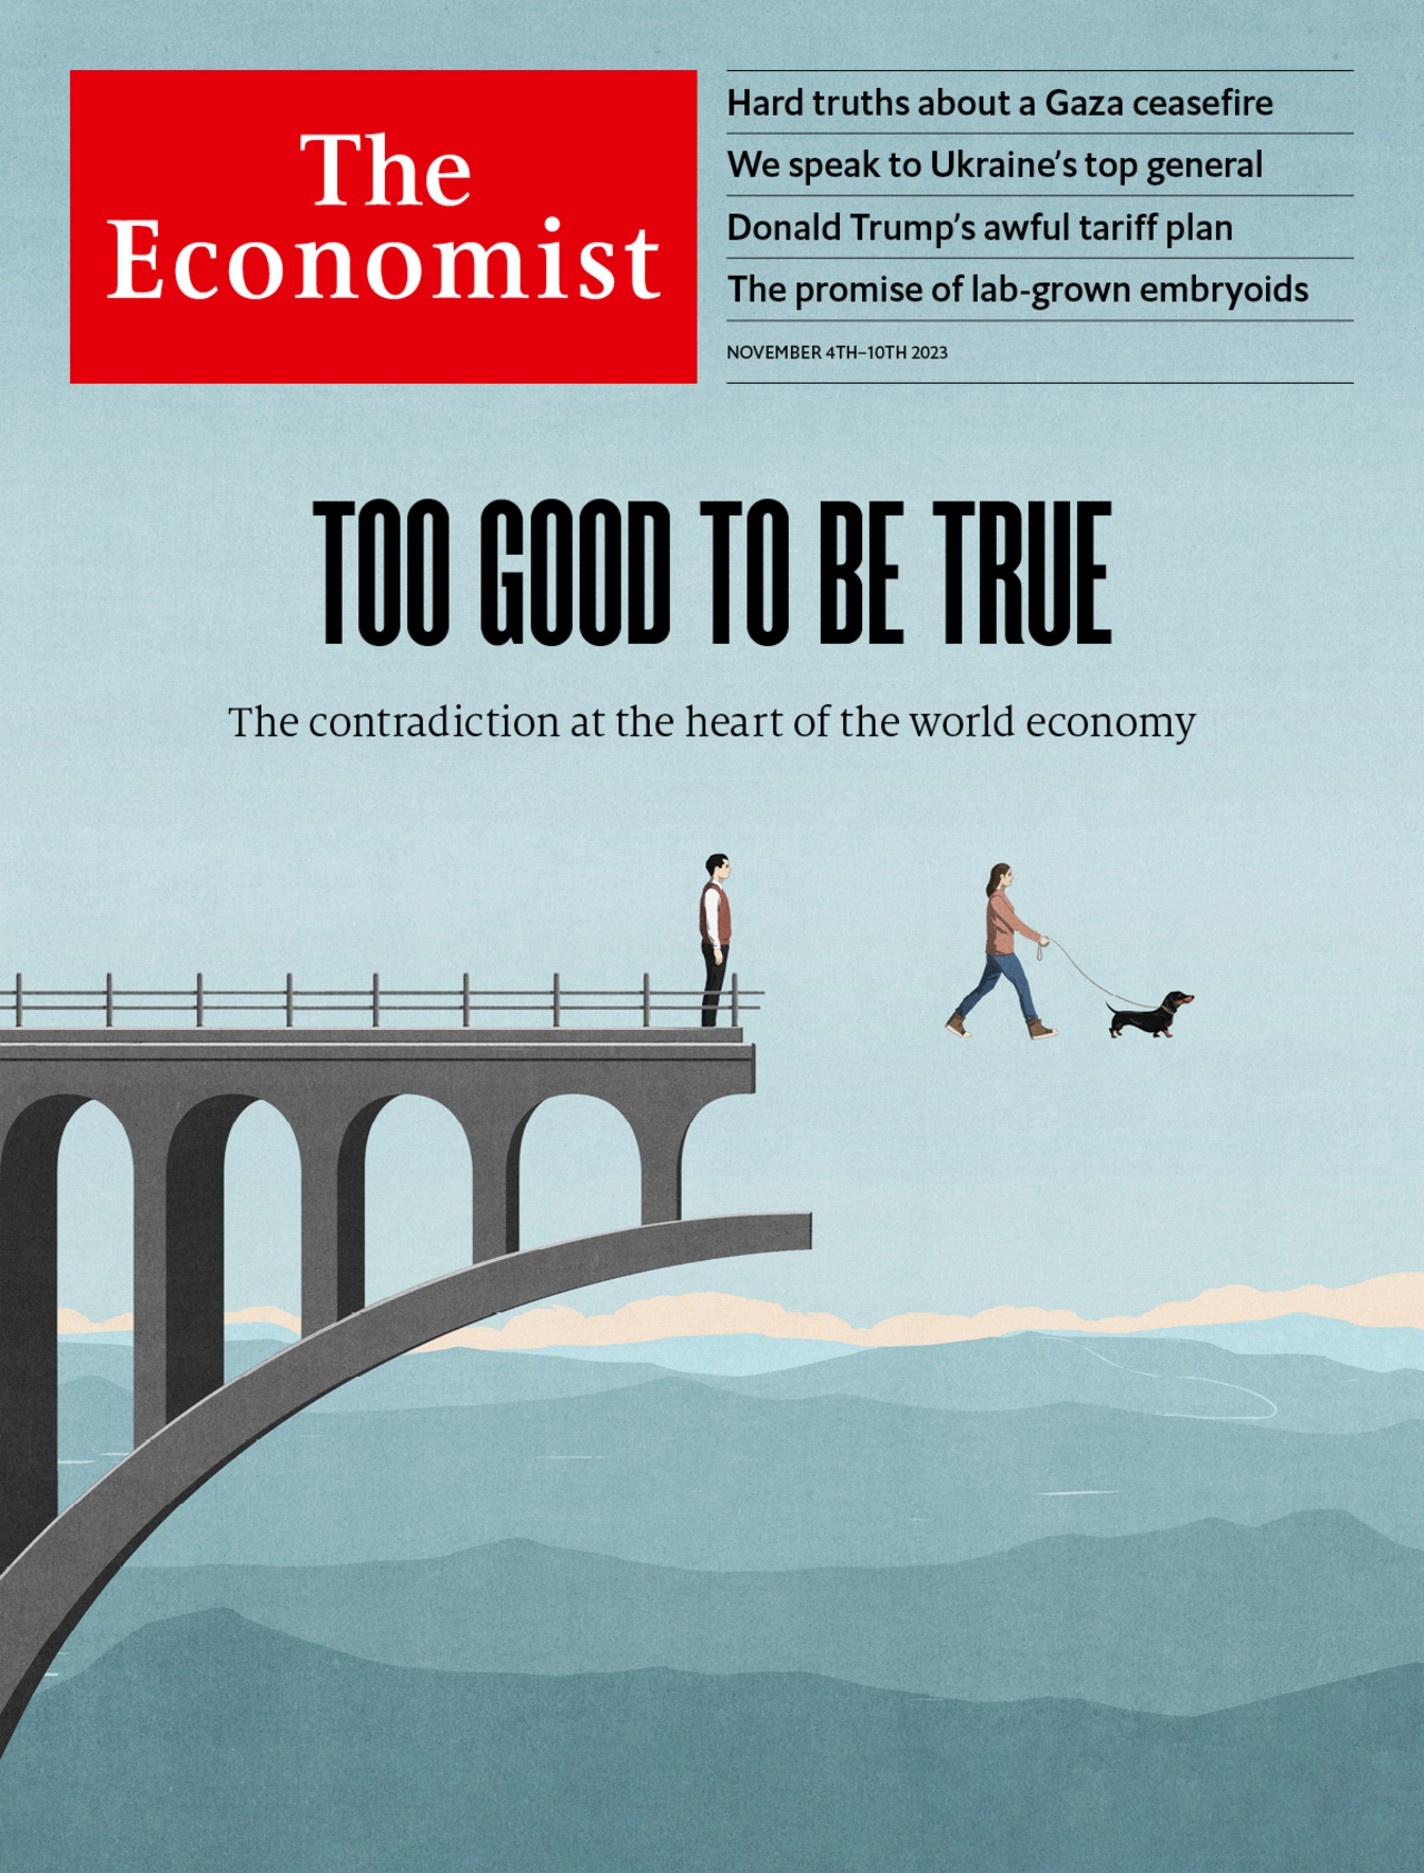 Too good to be true: The contradiction at the heart of the world economy